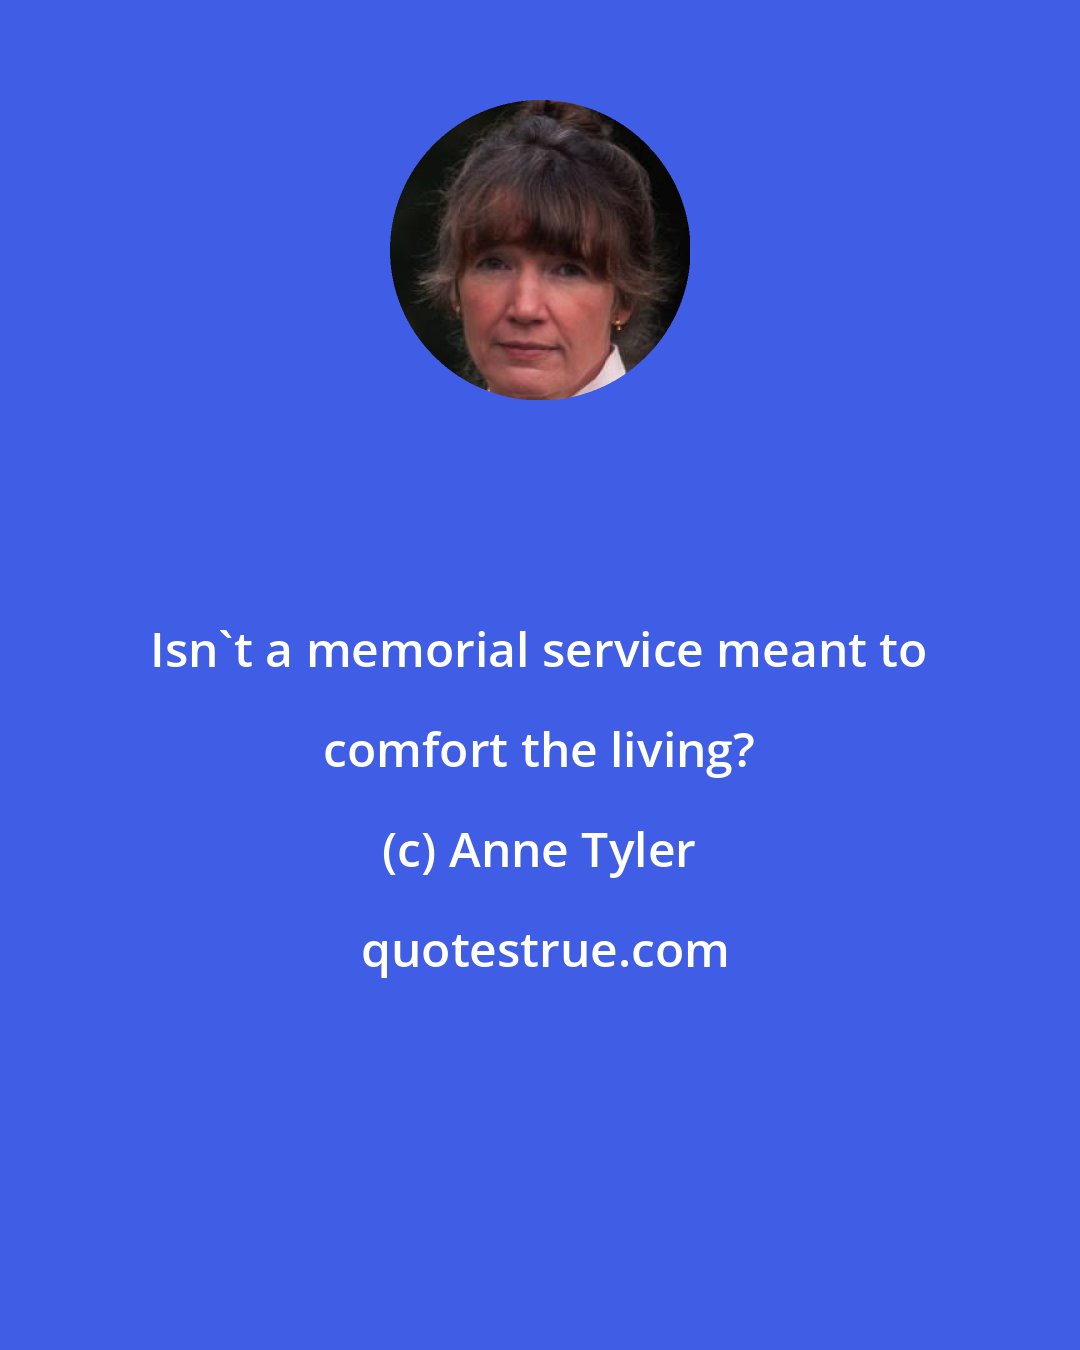 Anne Tyler: Isn't a memorial service meant to comfort the living?